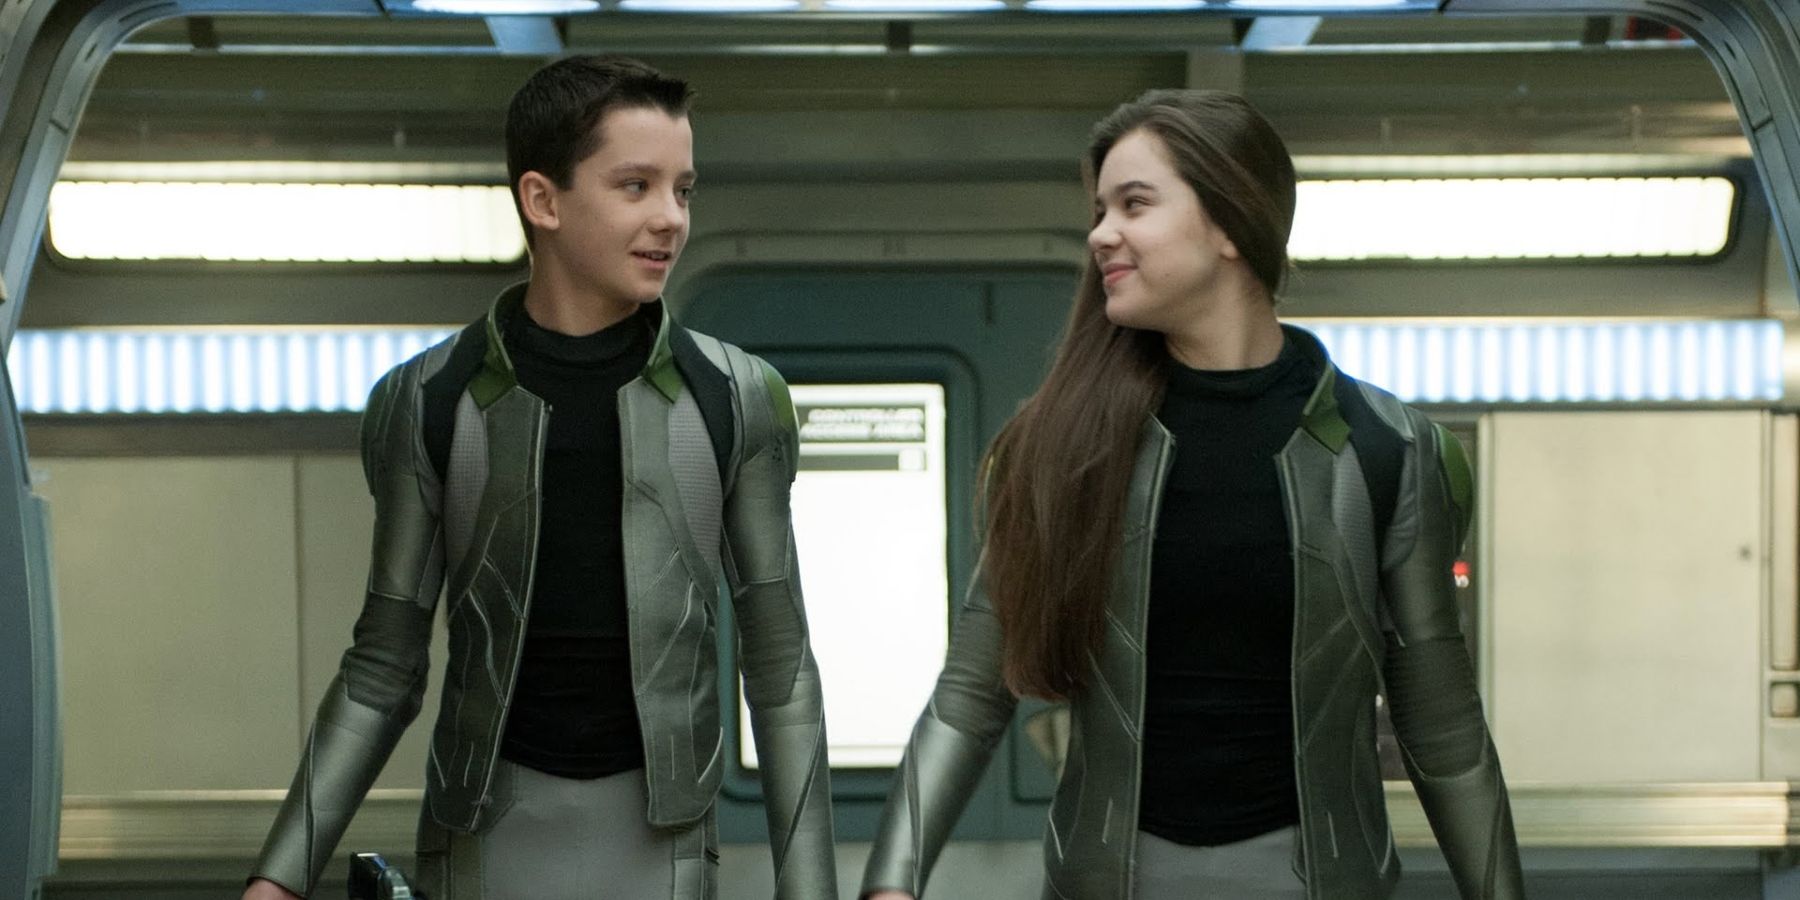 Asa Butterfield as Ender and Hailee Steinfeld as Petra in Ender's Game